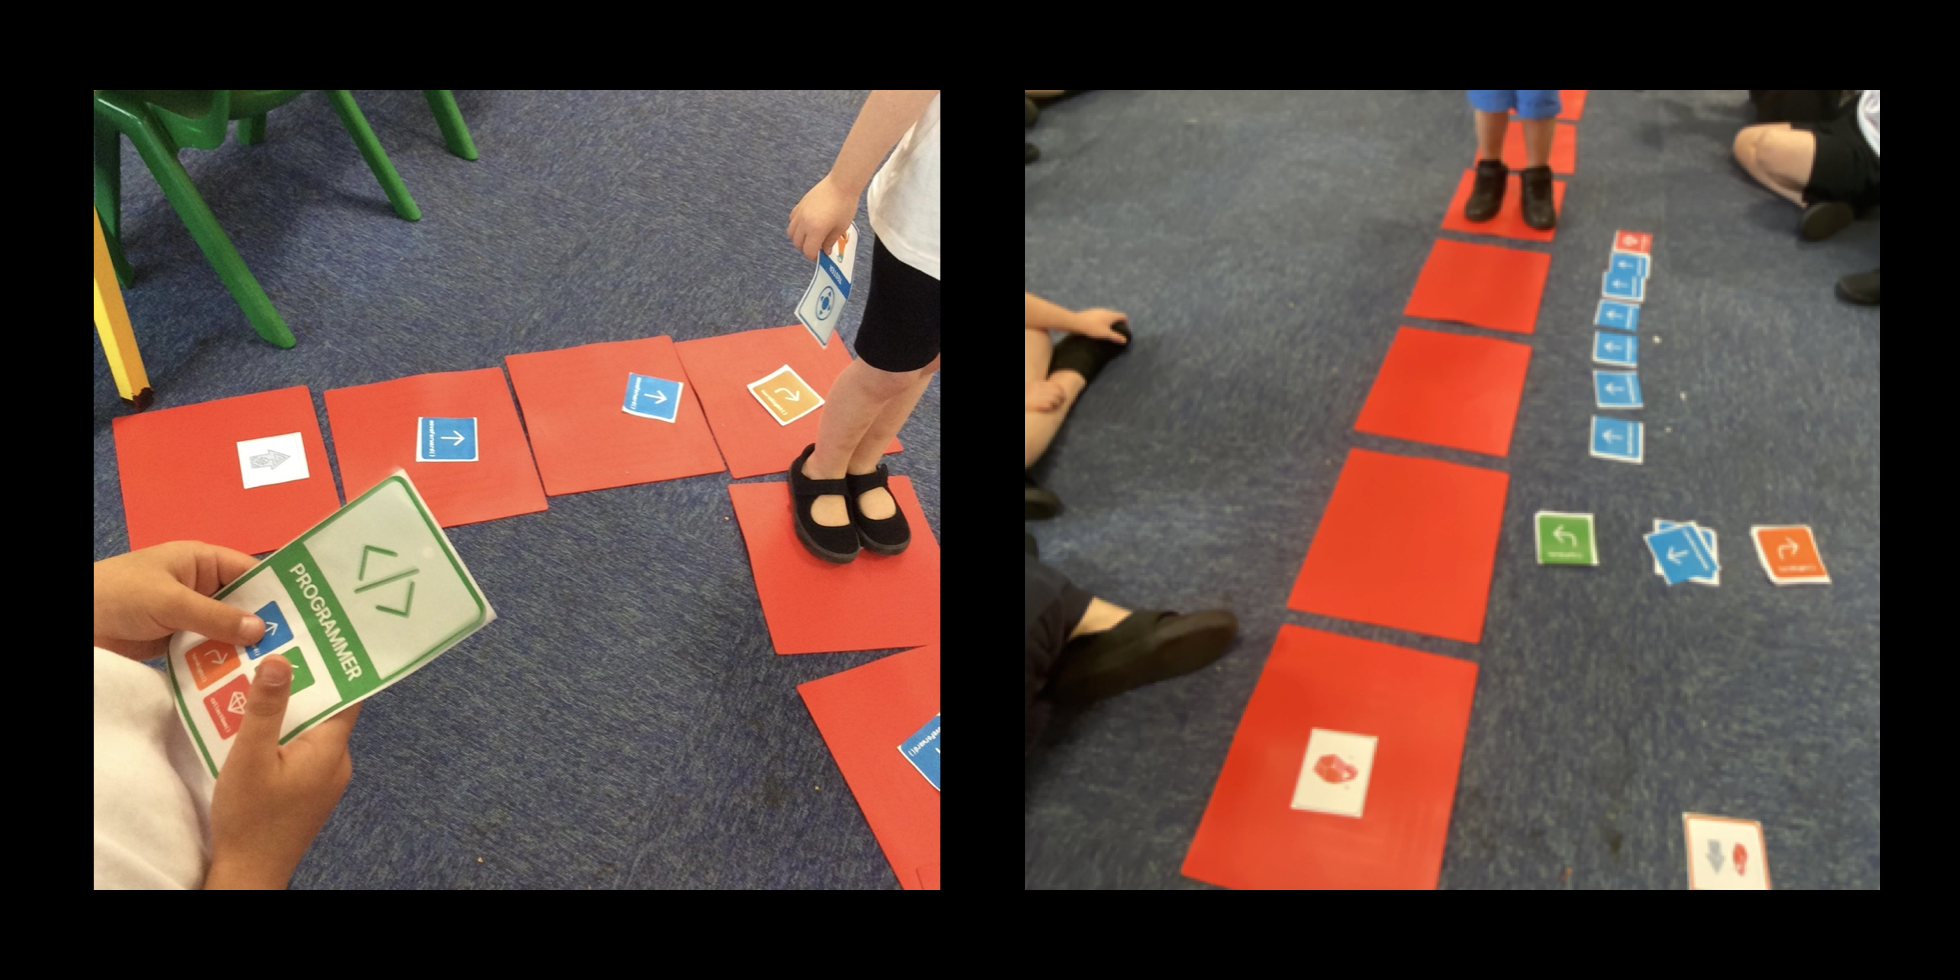 2 photographs showing 4 year olds using floor tiles to role play as robots. One child giving directional commands to another.